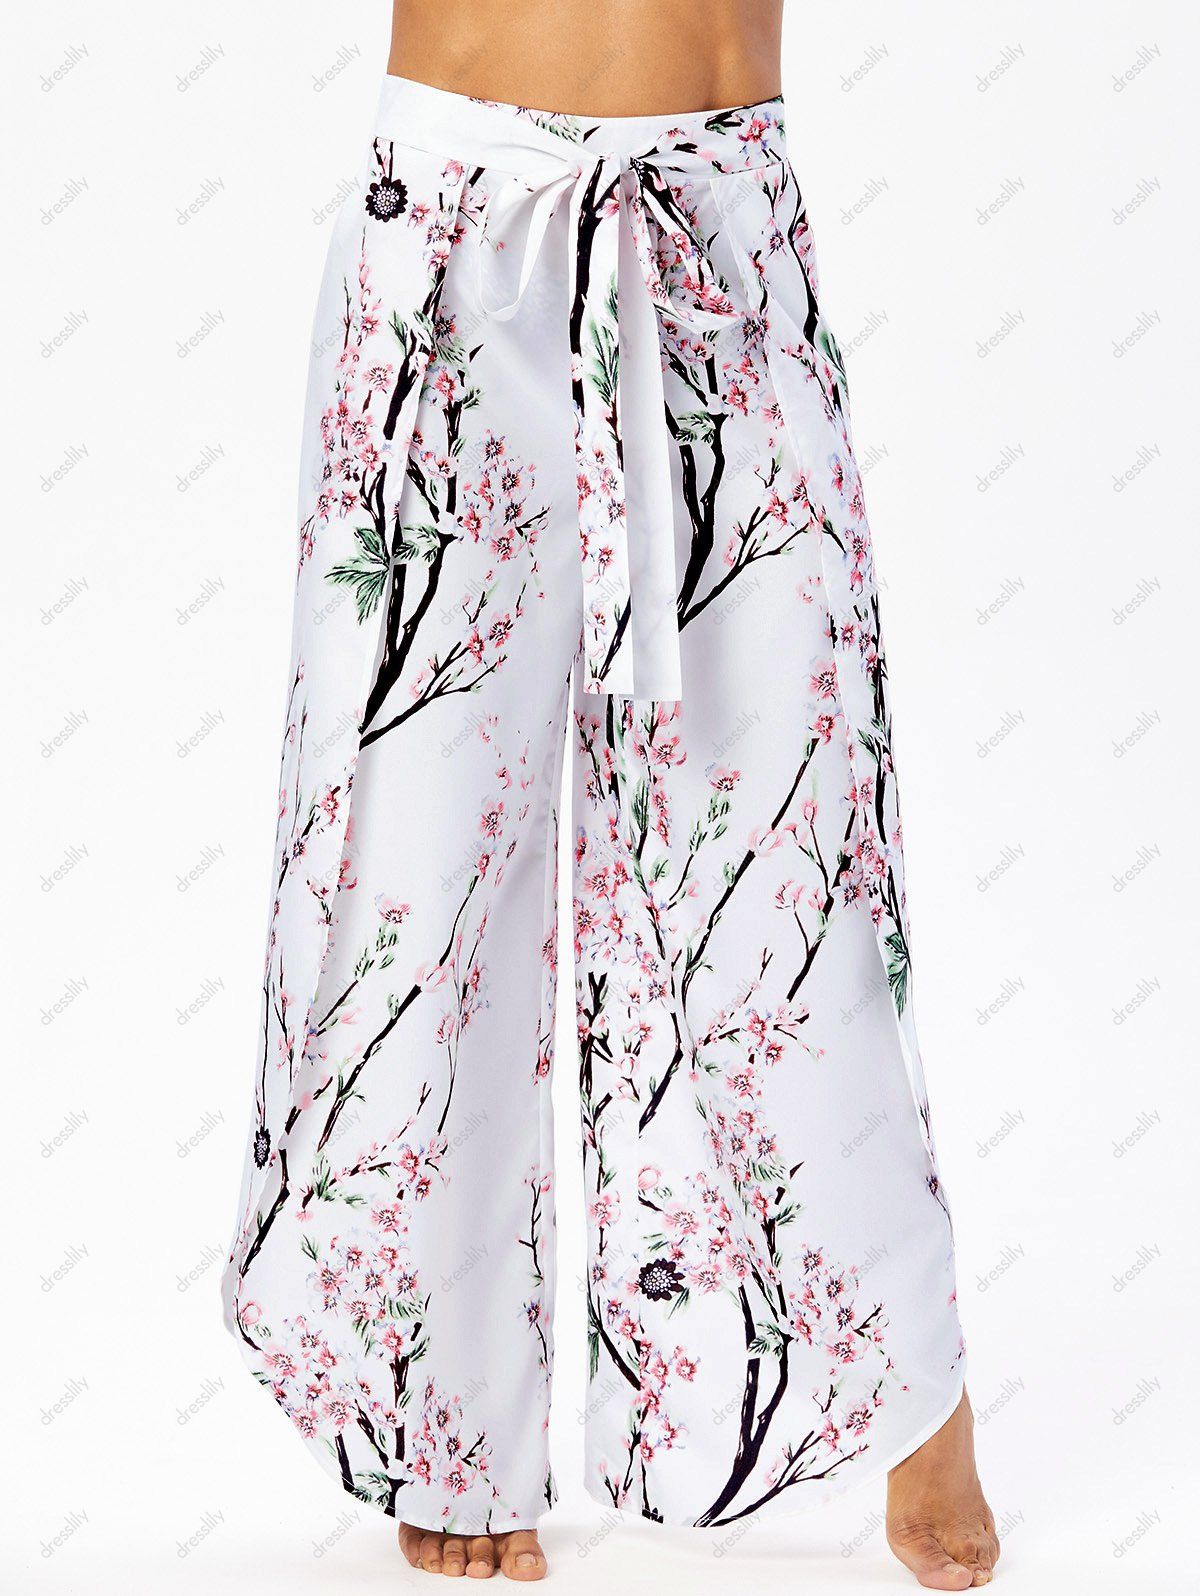 Casual Pants Floral Pants Peach Blossom Print Slit Self Belted Wide Leg Elastic Waist Vacation Pants 